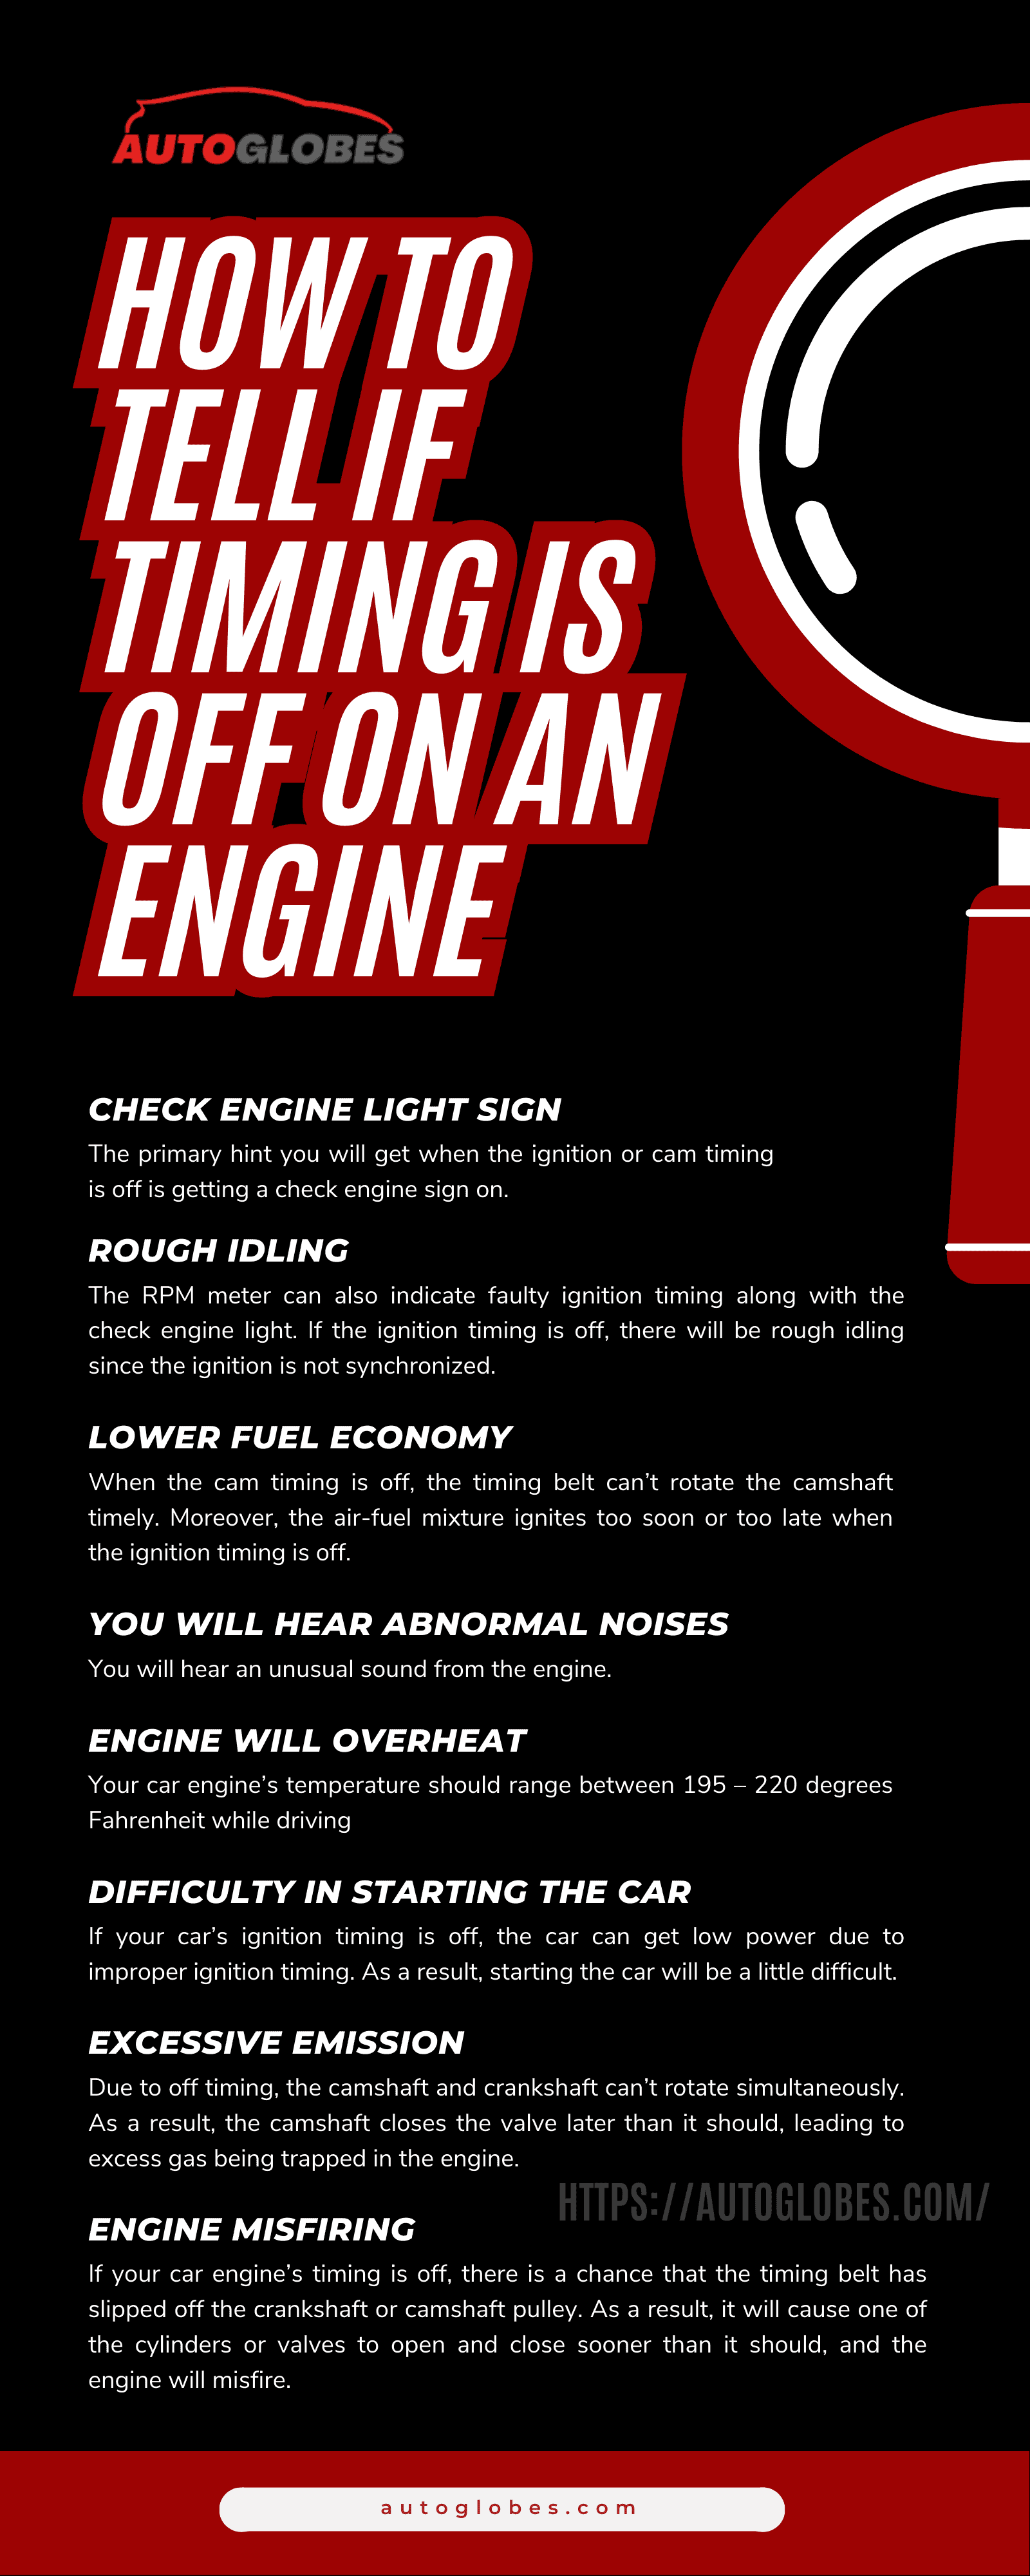 How To Tell If Timing Is Off On An Engine Infographic